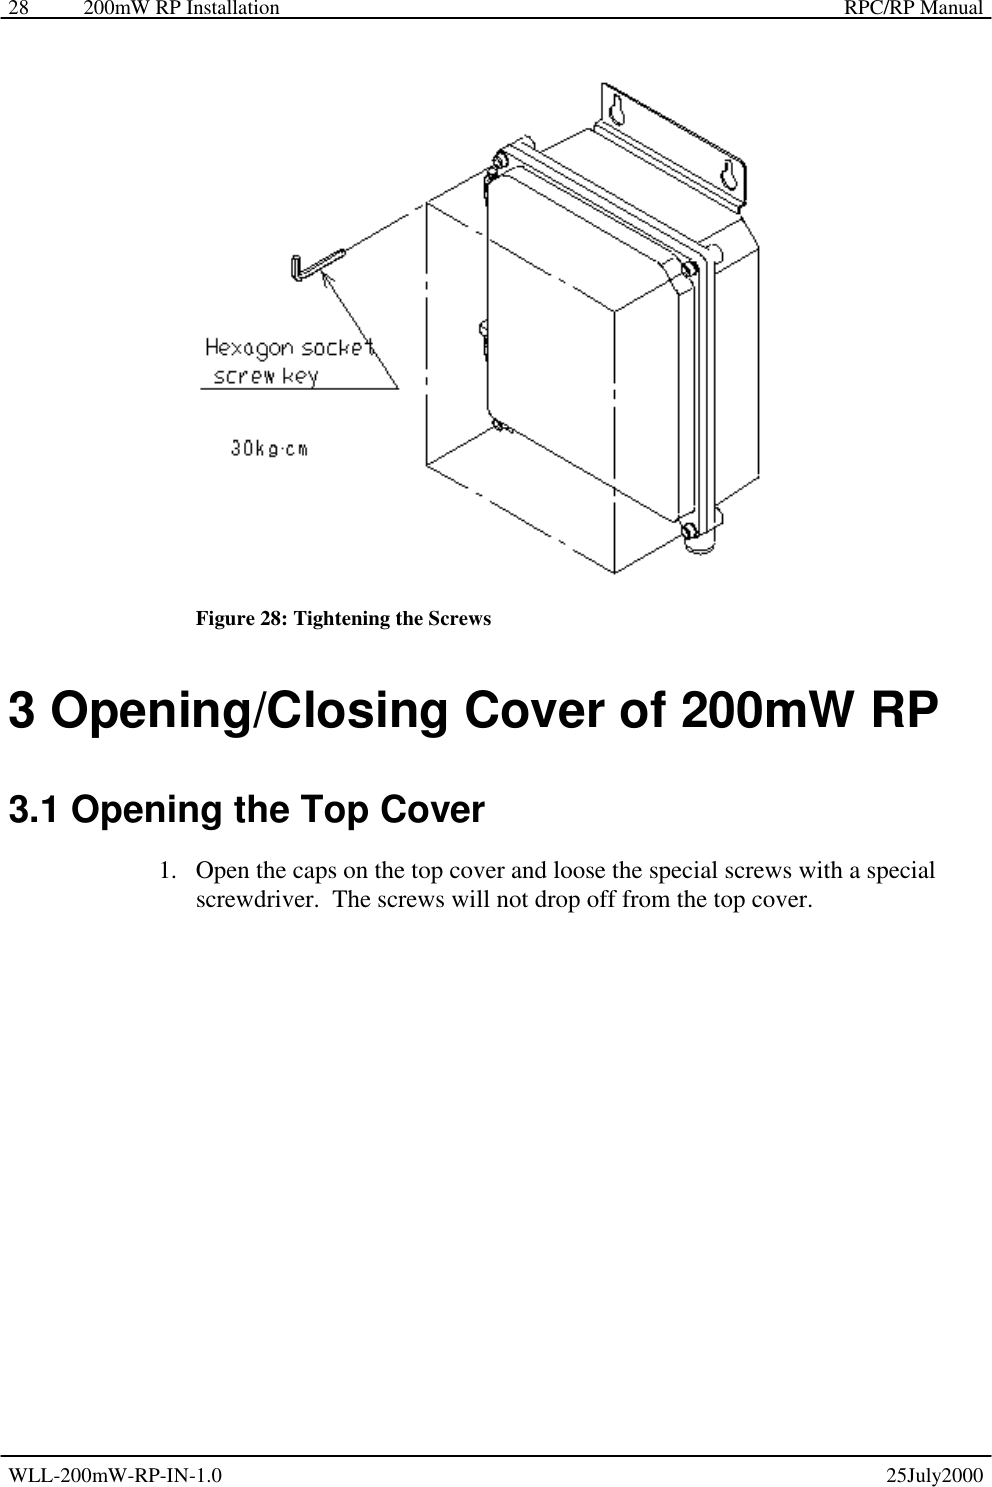 200mW RP Installation    RPC/RP Manual WLL-200mW-RP-IN-1.0   25July2000 28  Figure 28: Tightening the Screws 3 Opening/Closing Cover of 200mW RP 3.1 Opening the Top Cover 1.  Open the caps on the top cover and loose the special screws with a special screwdriver.  The screws will not drop off from the top cover. 